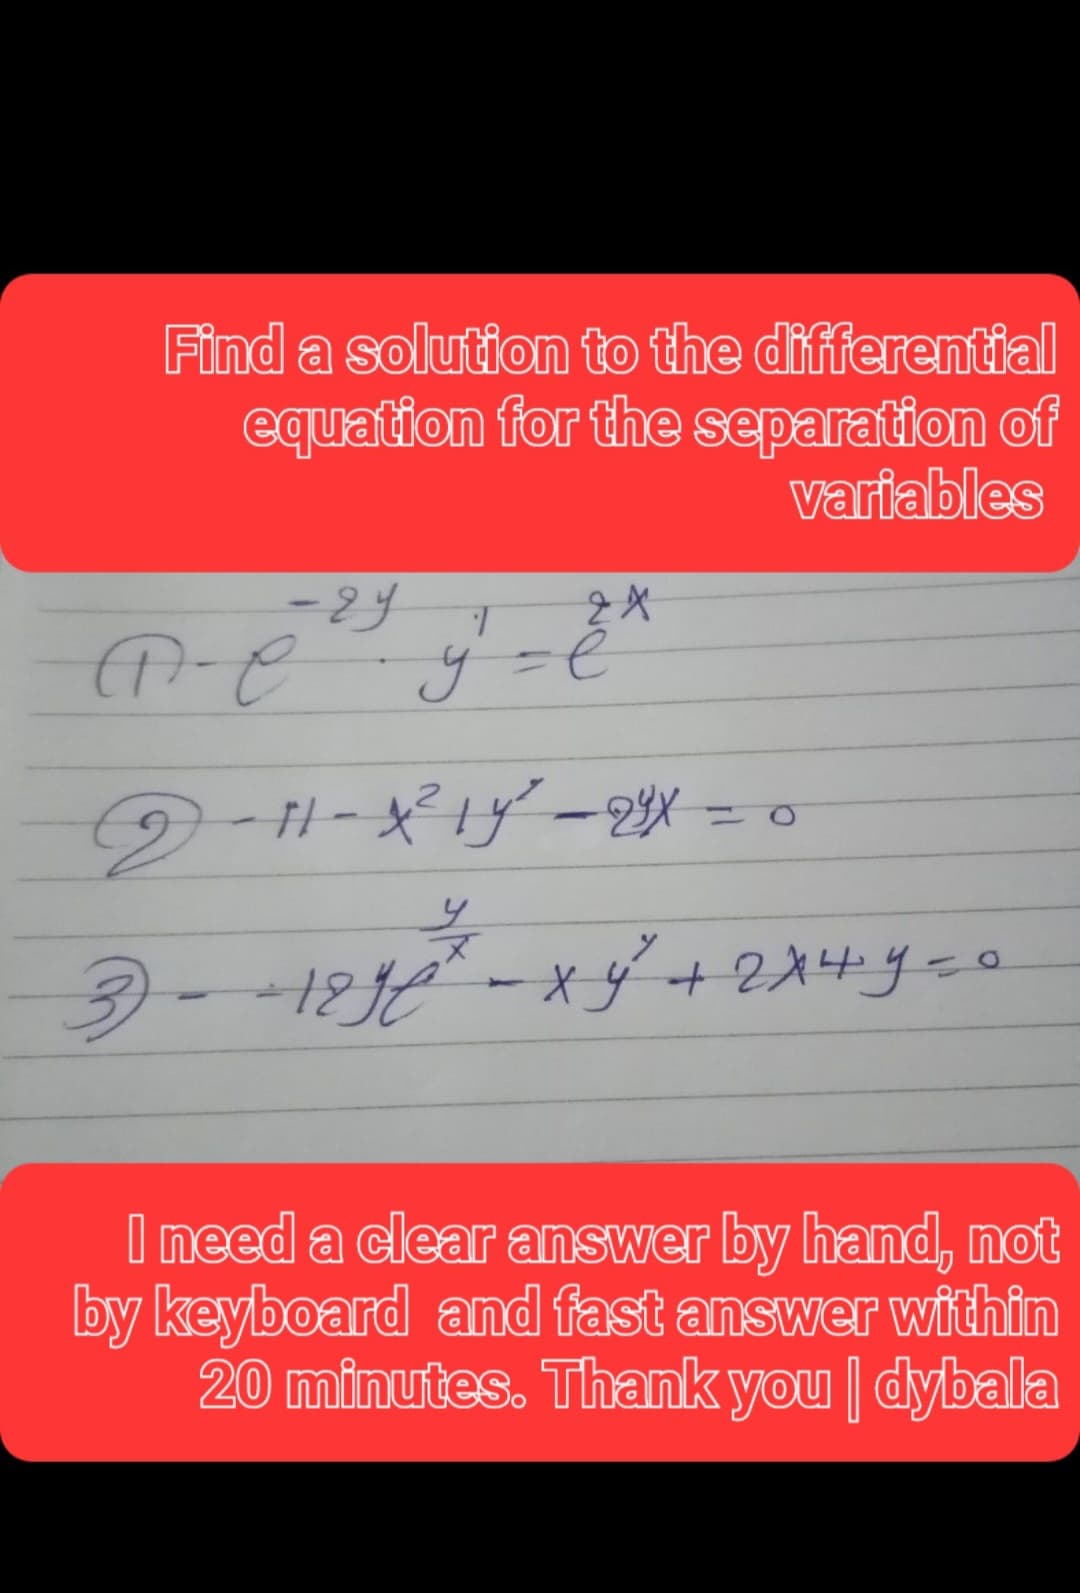 Find a solution to the differential
equation for the separation of
variables
-24
2X
A-e ý=e"
те
y
2
11-x²1 y² - 29x =
9-1
-0
2x+y و -
y
3 - 1896² - xy²³² + 2 x 4 y = 0
I need a clear answer by hand, not
by keyboard and fast answer within
20 minutes. Thank you | dybala